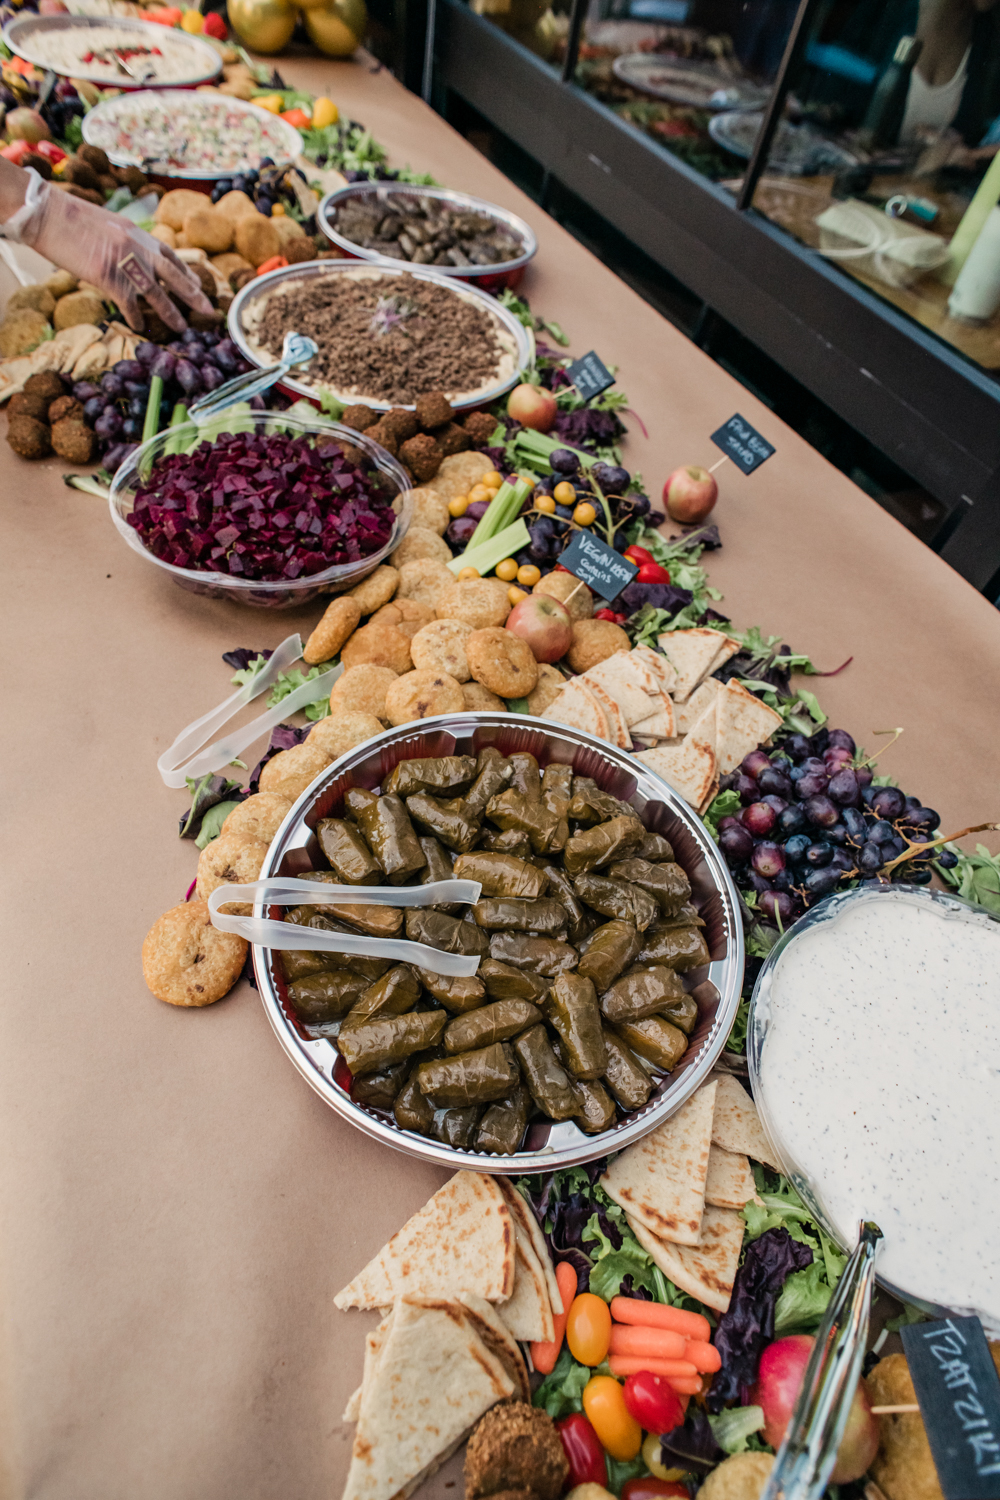 Koshary at r house plant based meals event photography for brands table display